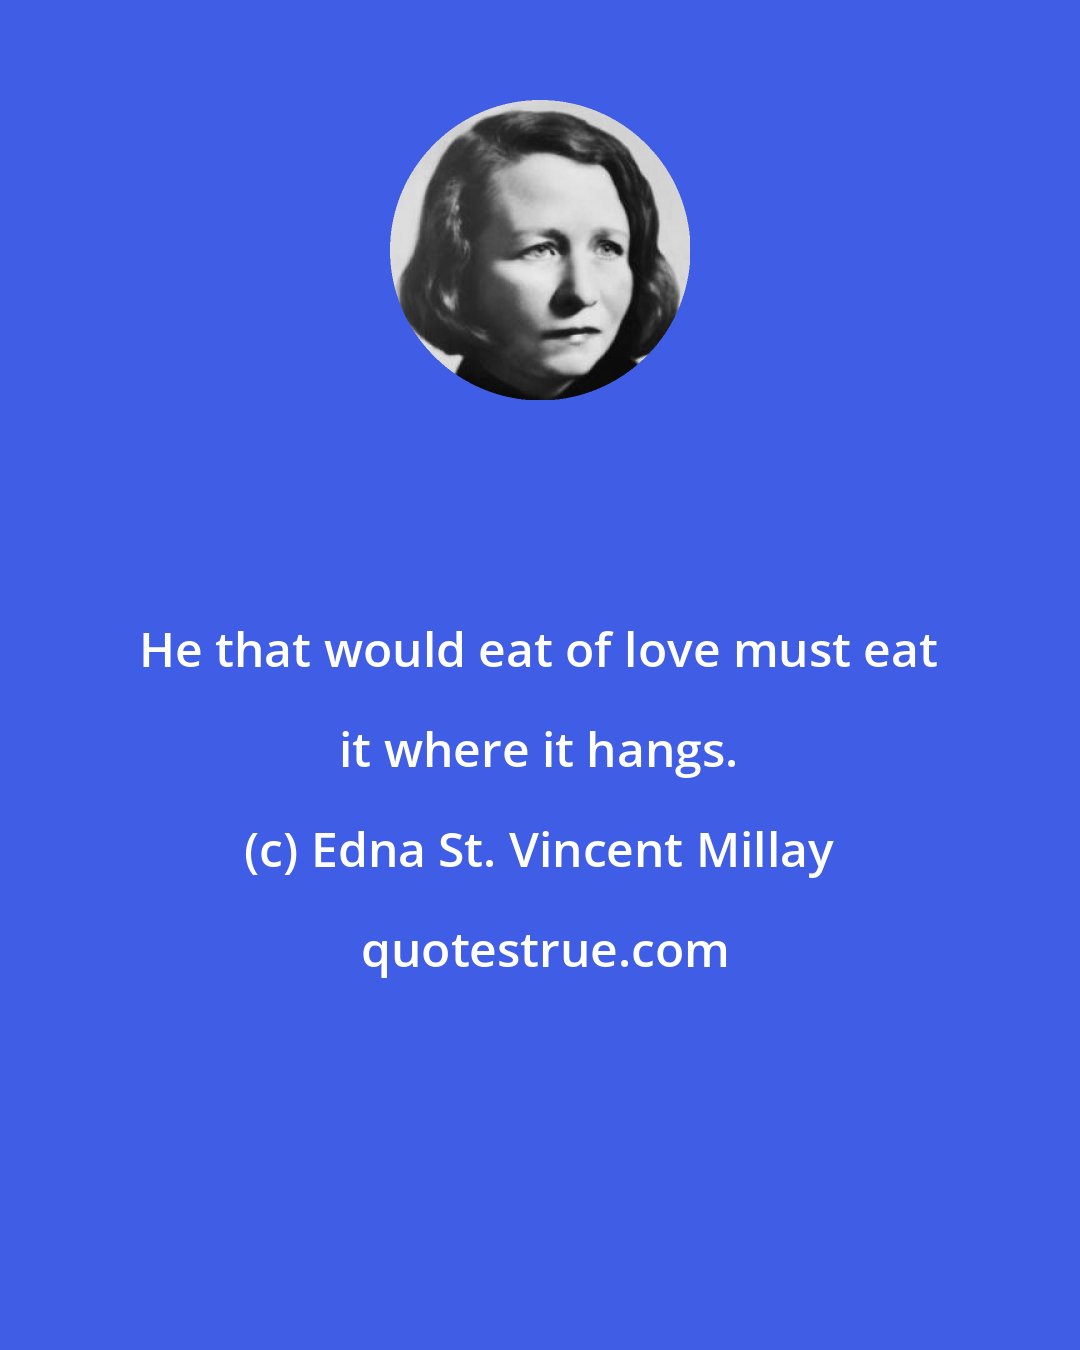 Edna St. Vincent Millay: He that would eat of love must eat it where it hangs.